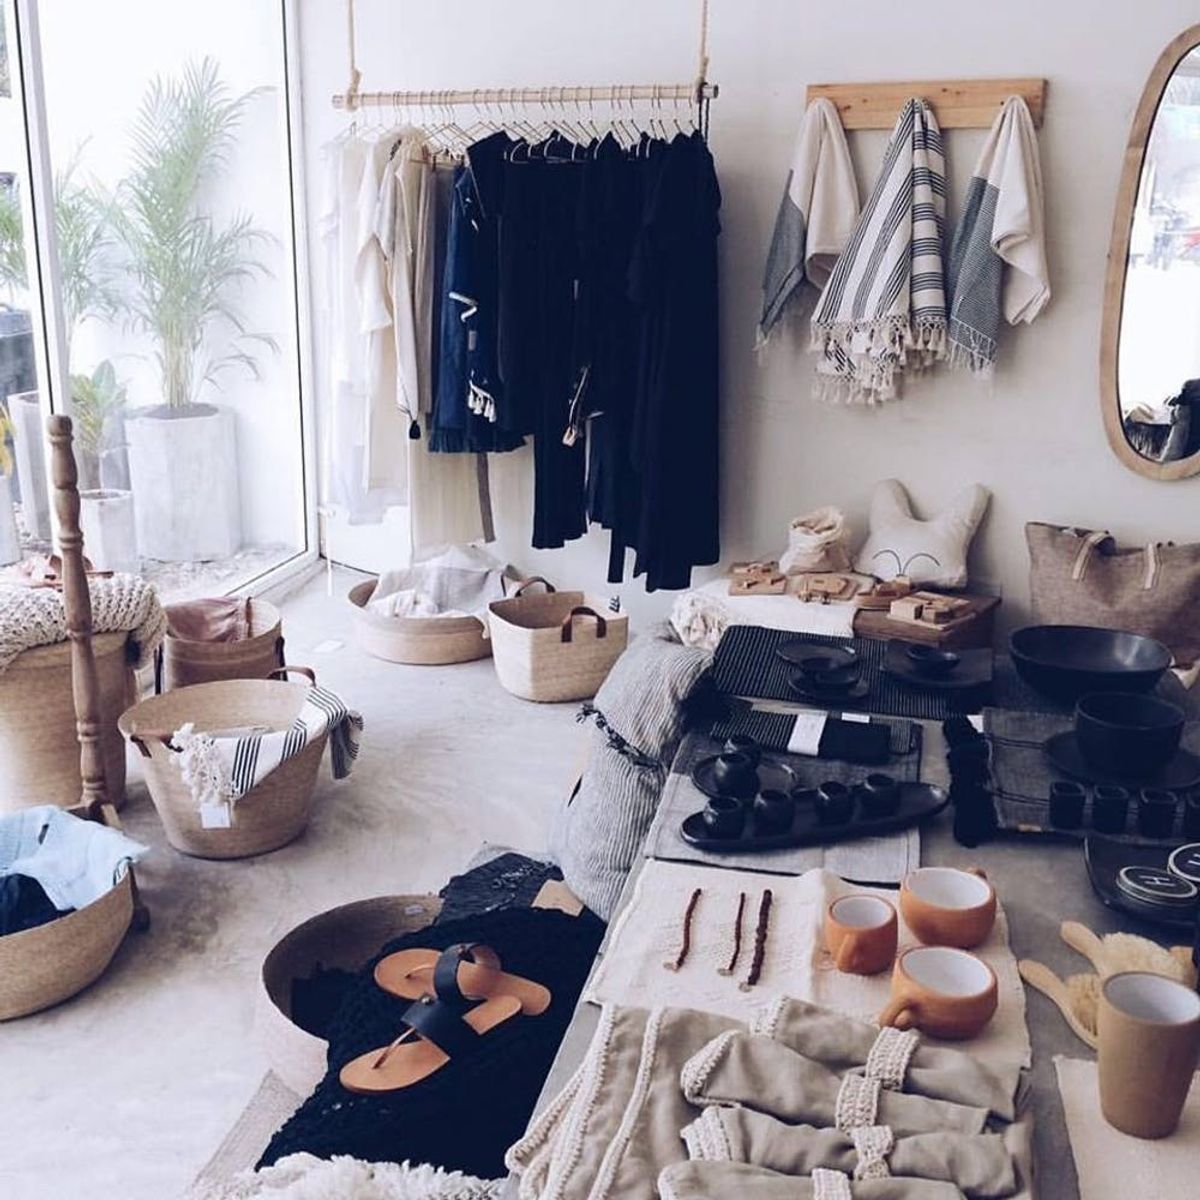 The Ultimate Travel Guide to Shopping in Tulum